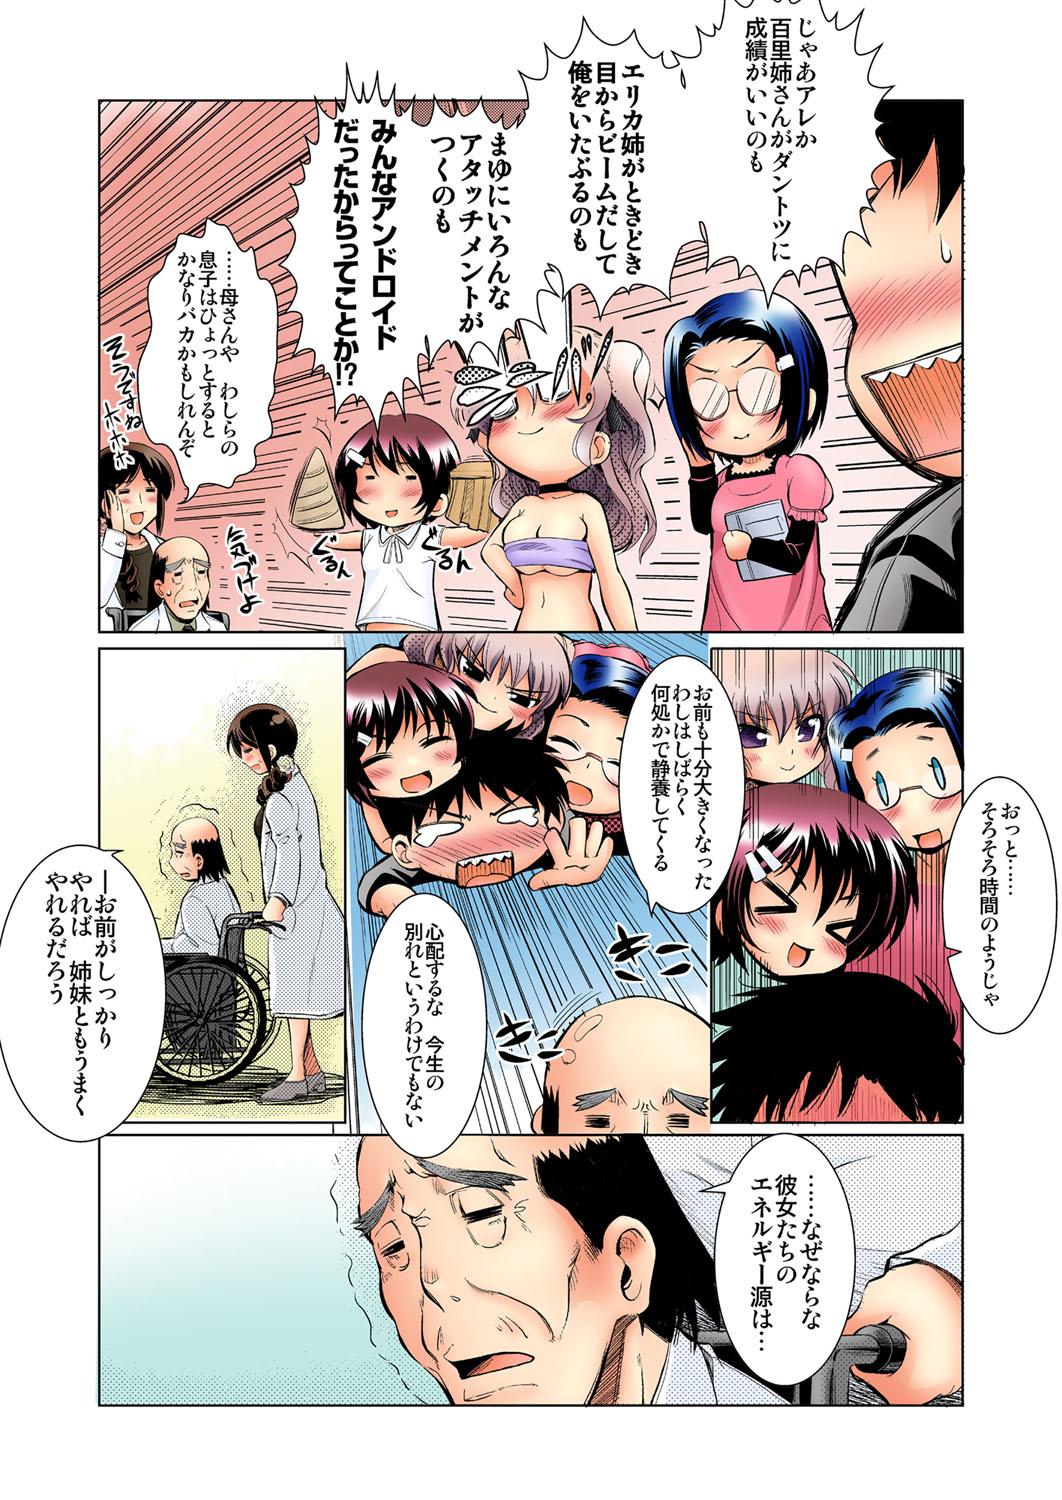 Camgirl The Loving Family - My Sisters Are Androids and Cyborgs?! Oldvsyoung - Page 5